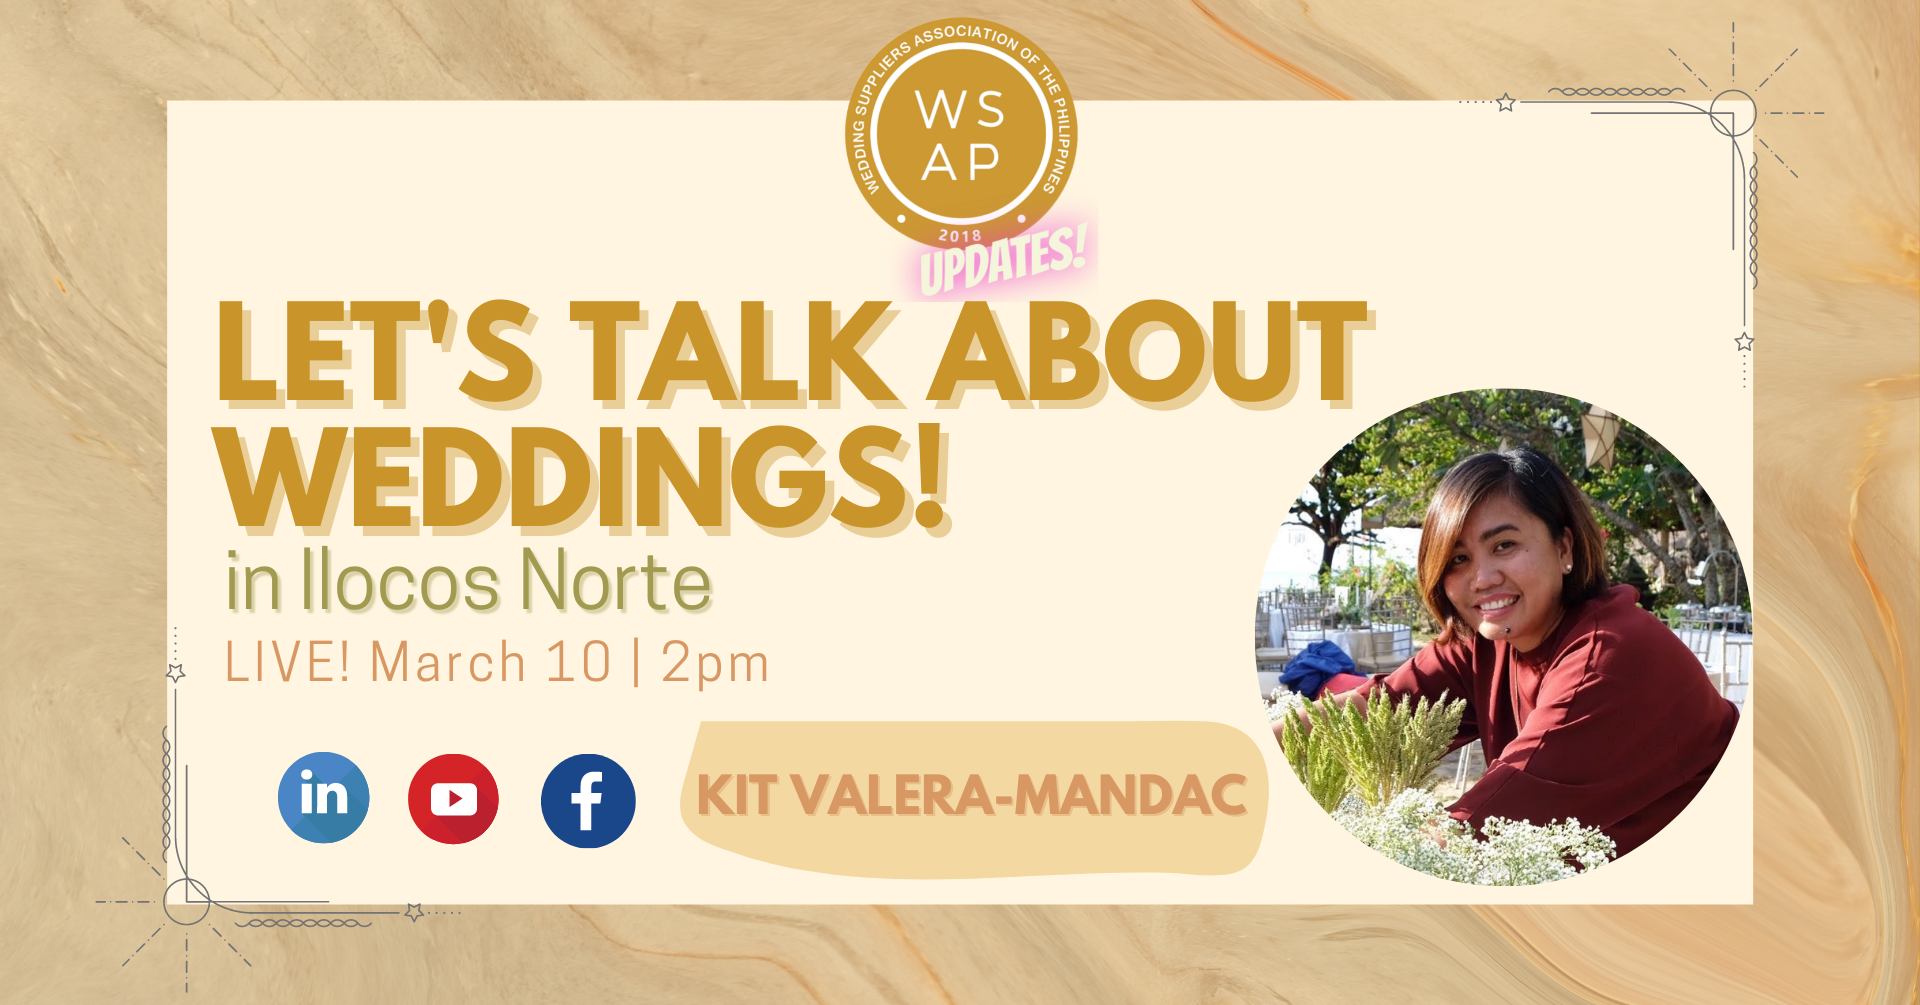 Let's Talk About Weddings in Ilocos Norte with Kit Valera-Mandac